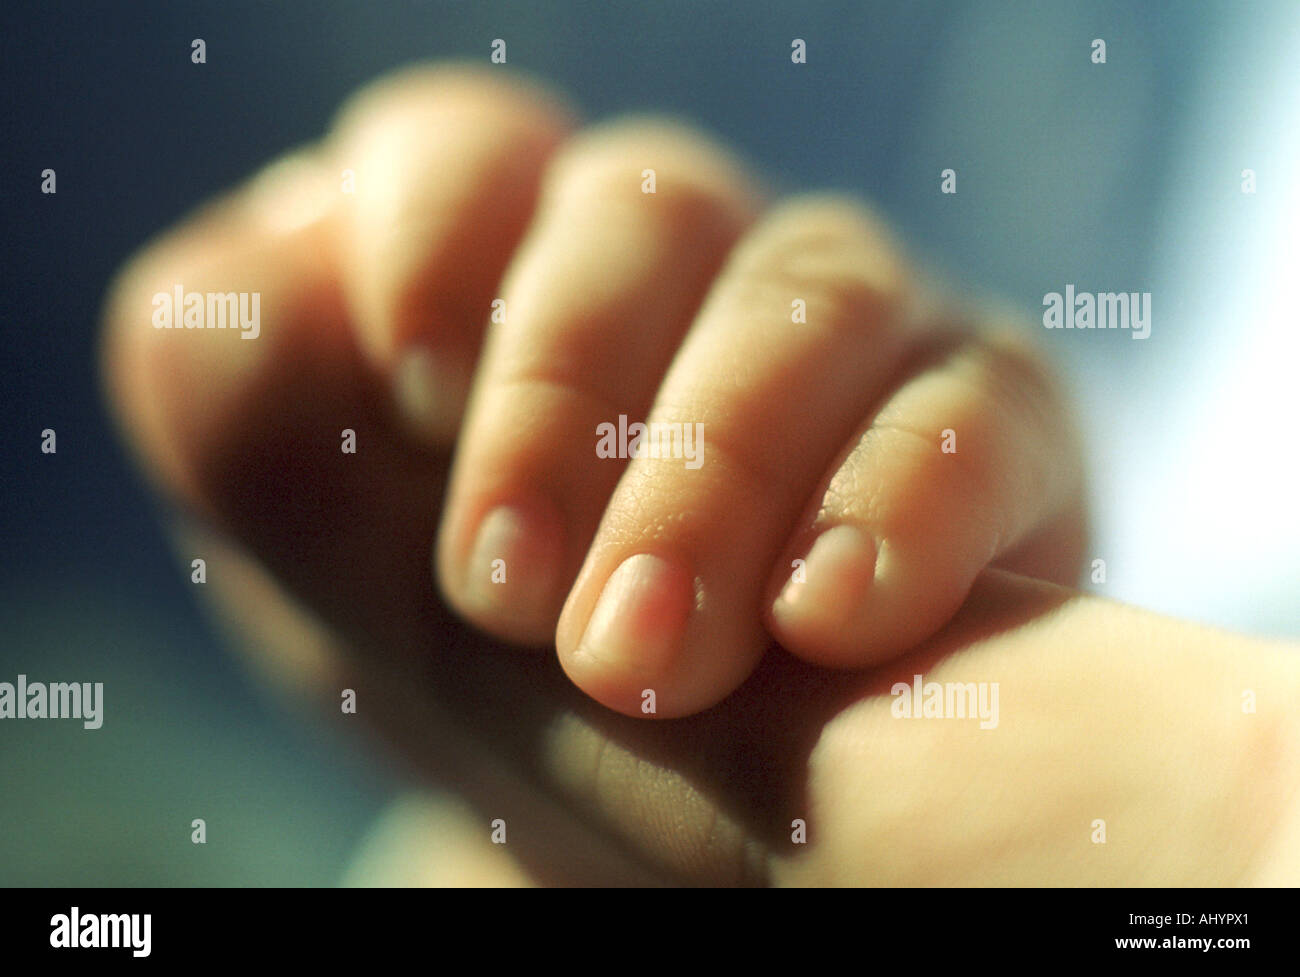 Tiny Baby fingers grasp an adult finger Stock Photo